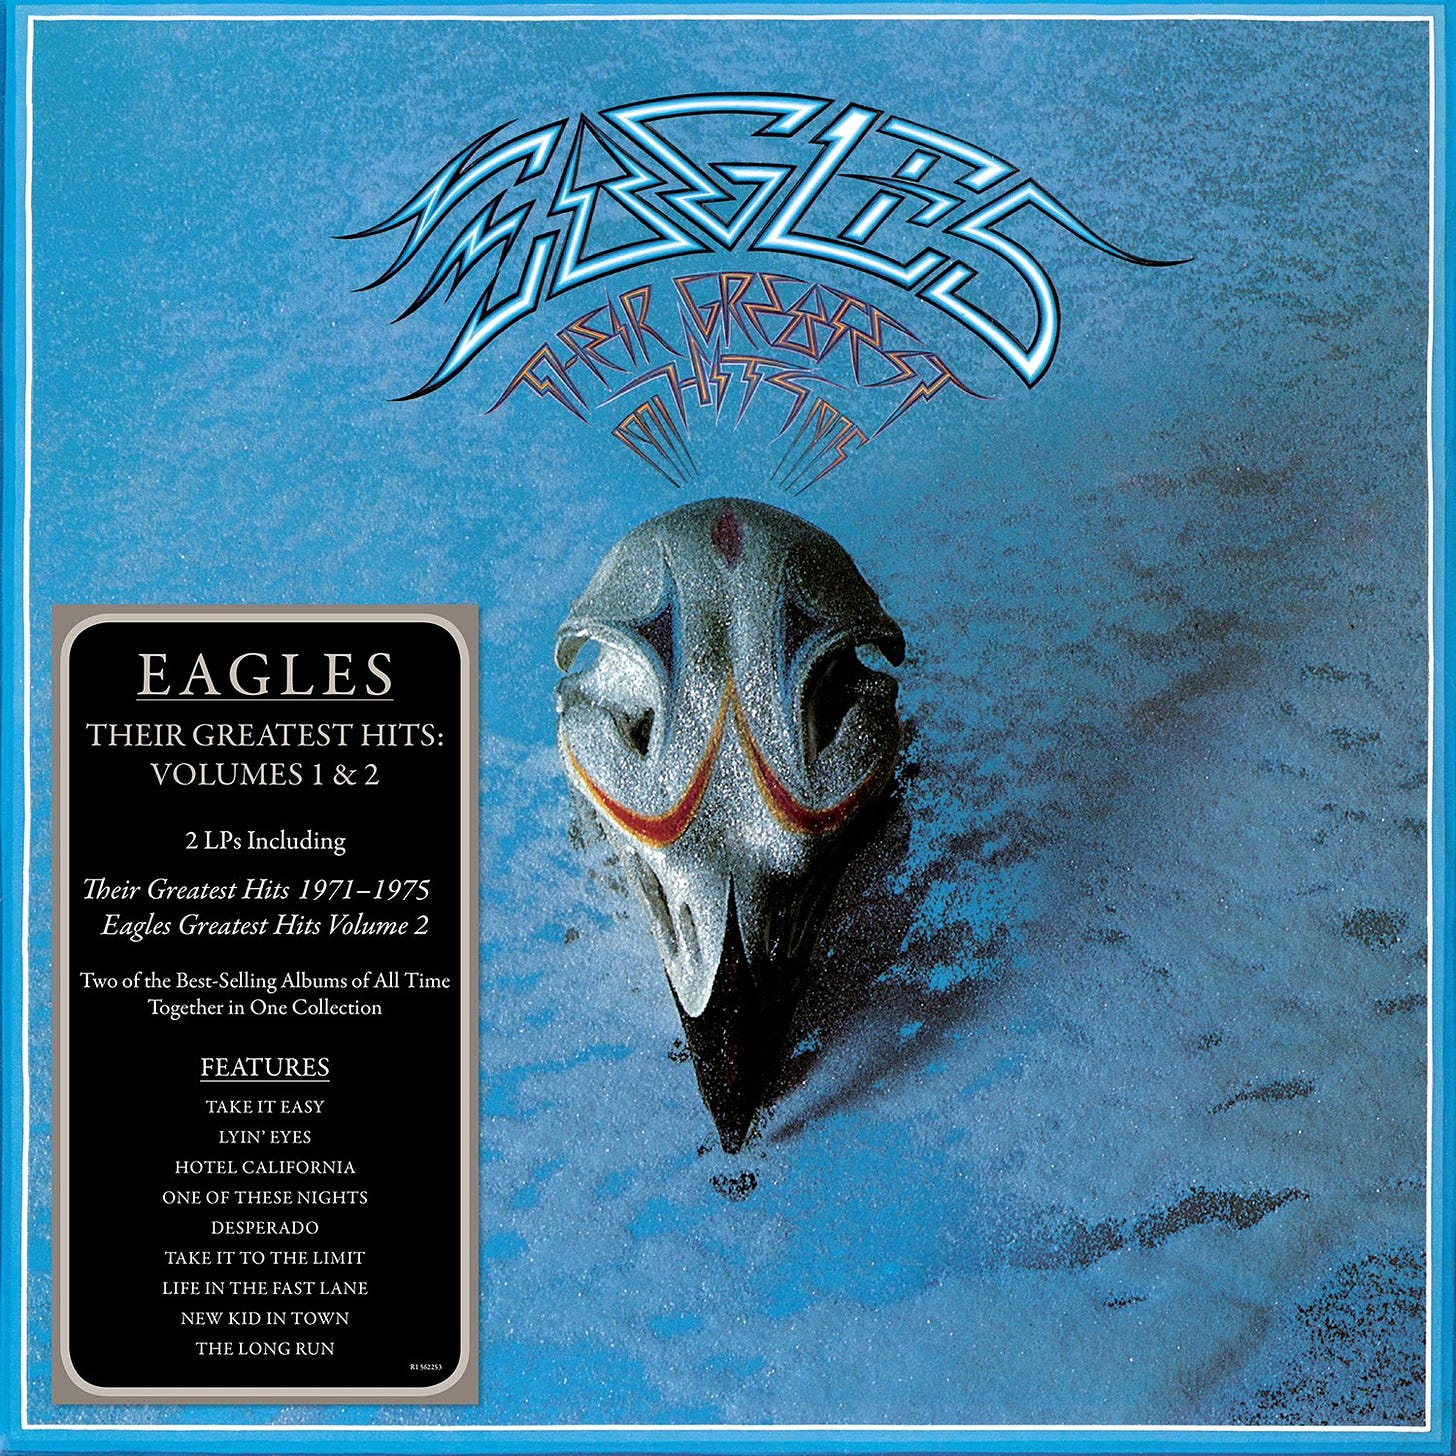 Eagles - Their Greatest Hits Volumes 1 & 2 (2CD) - Amazon.com Music